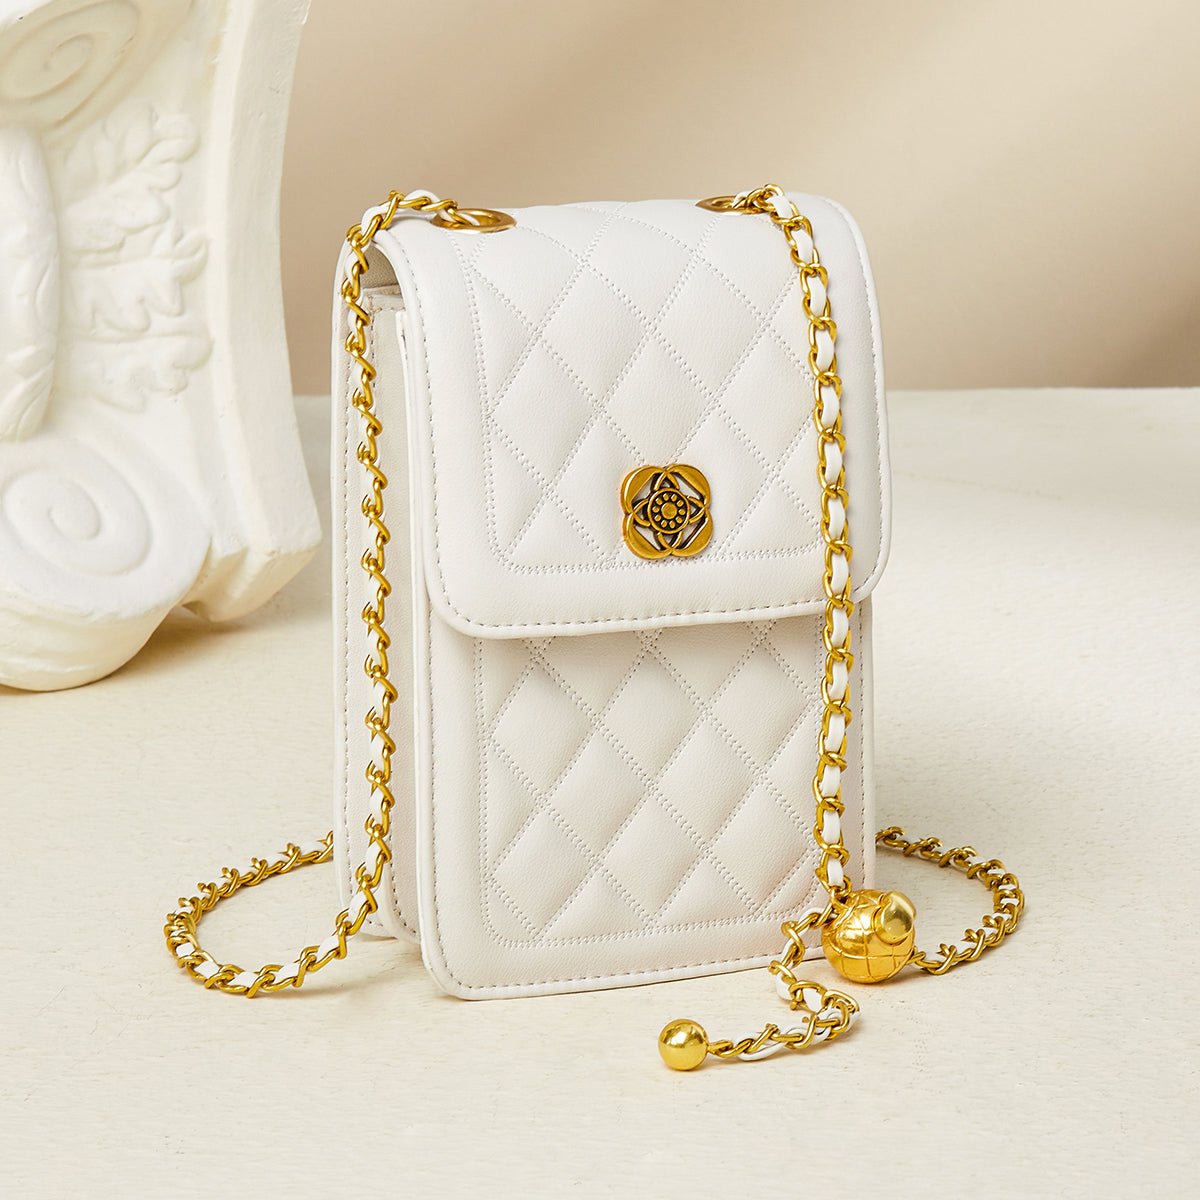 White Quilted Leather Chain Strap Bag